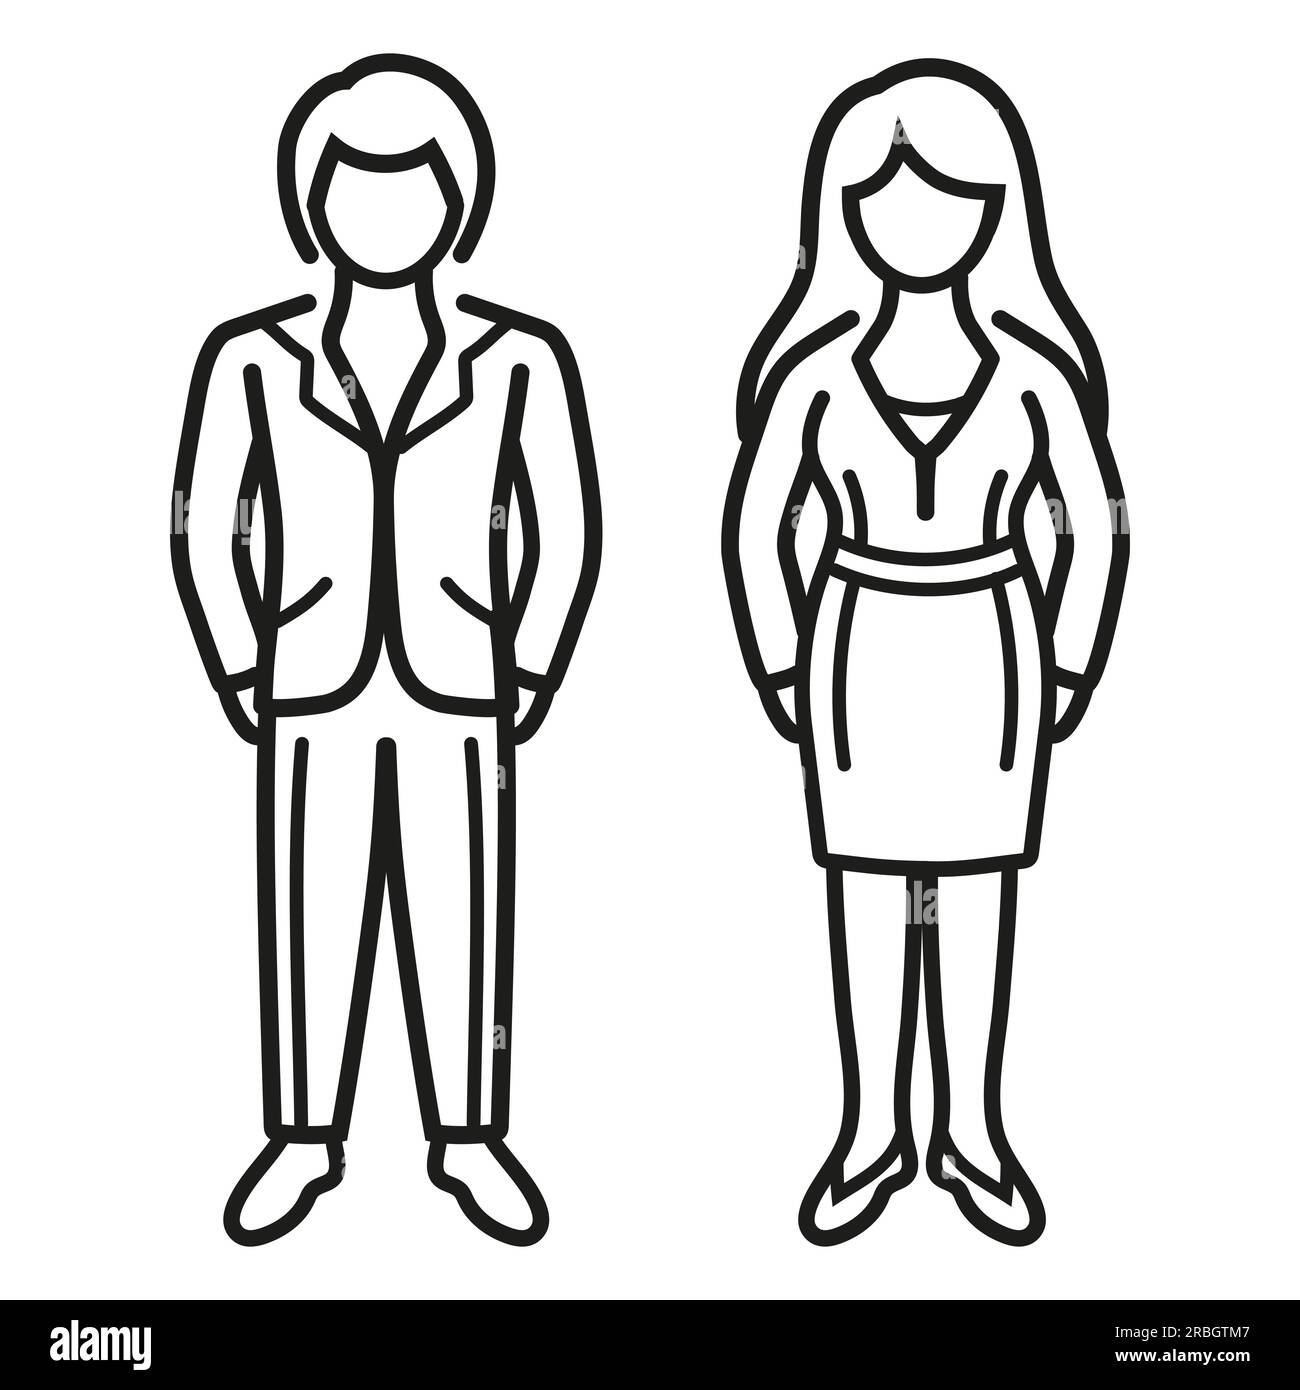 Business man and woman, toilet couple, office worker, company staff line icon. Elegant male, female person, family. Corporate member, team work vector Stock Vector